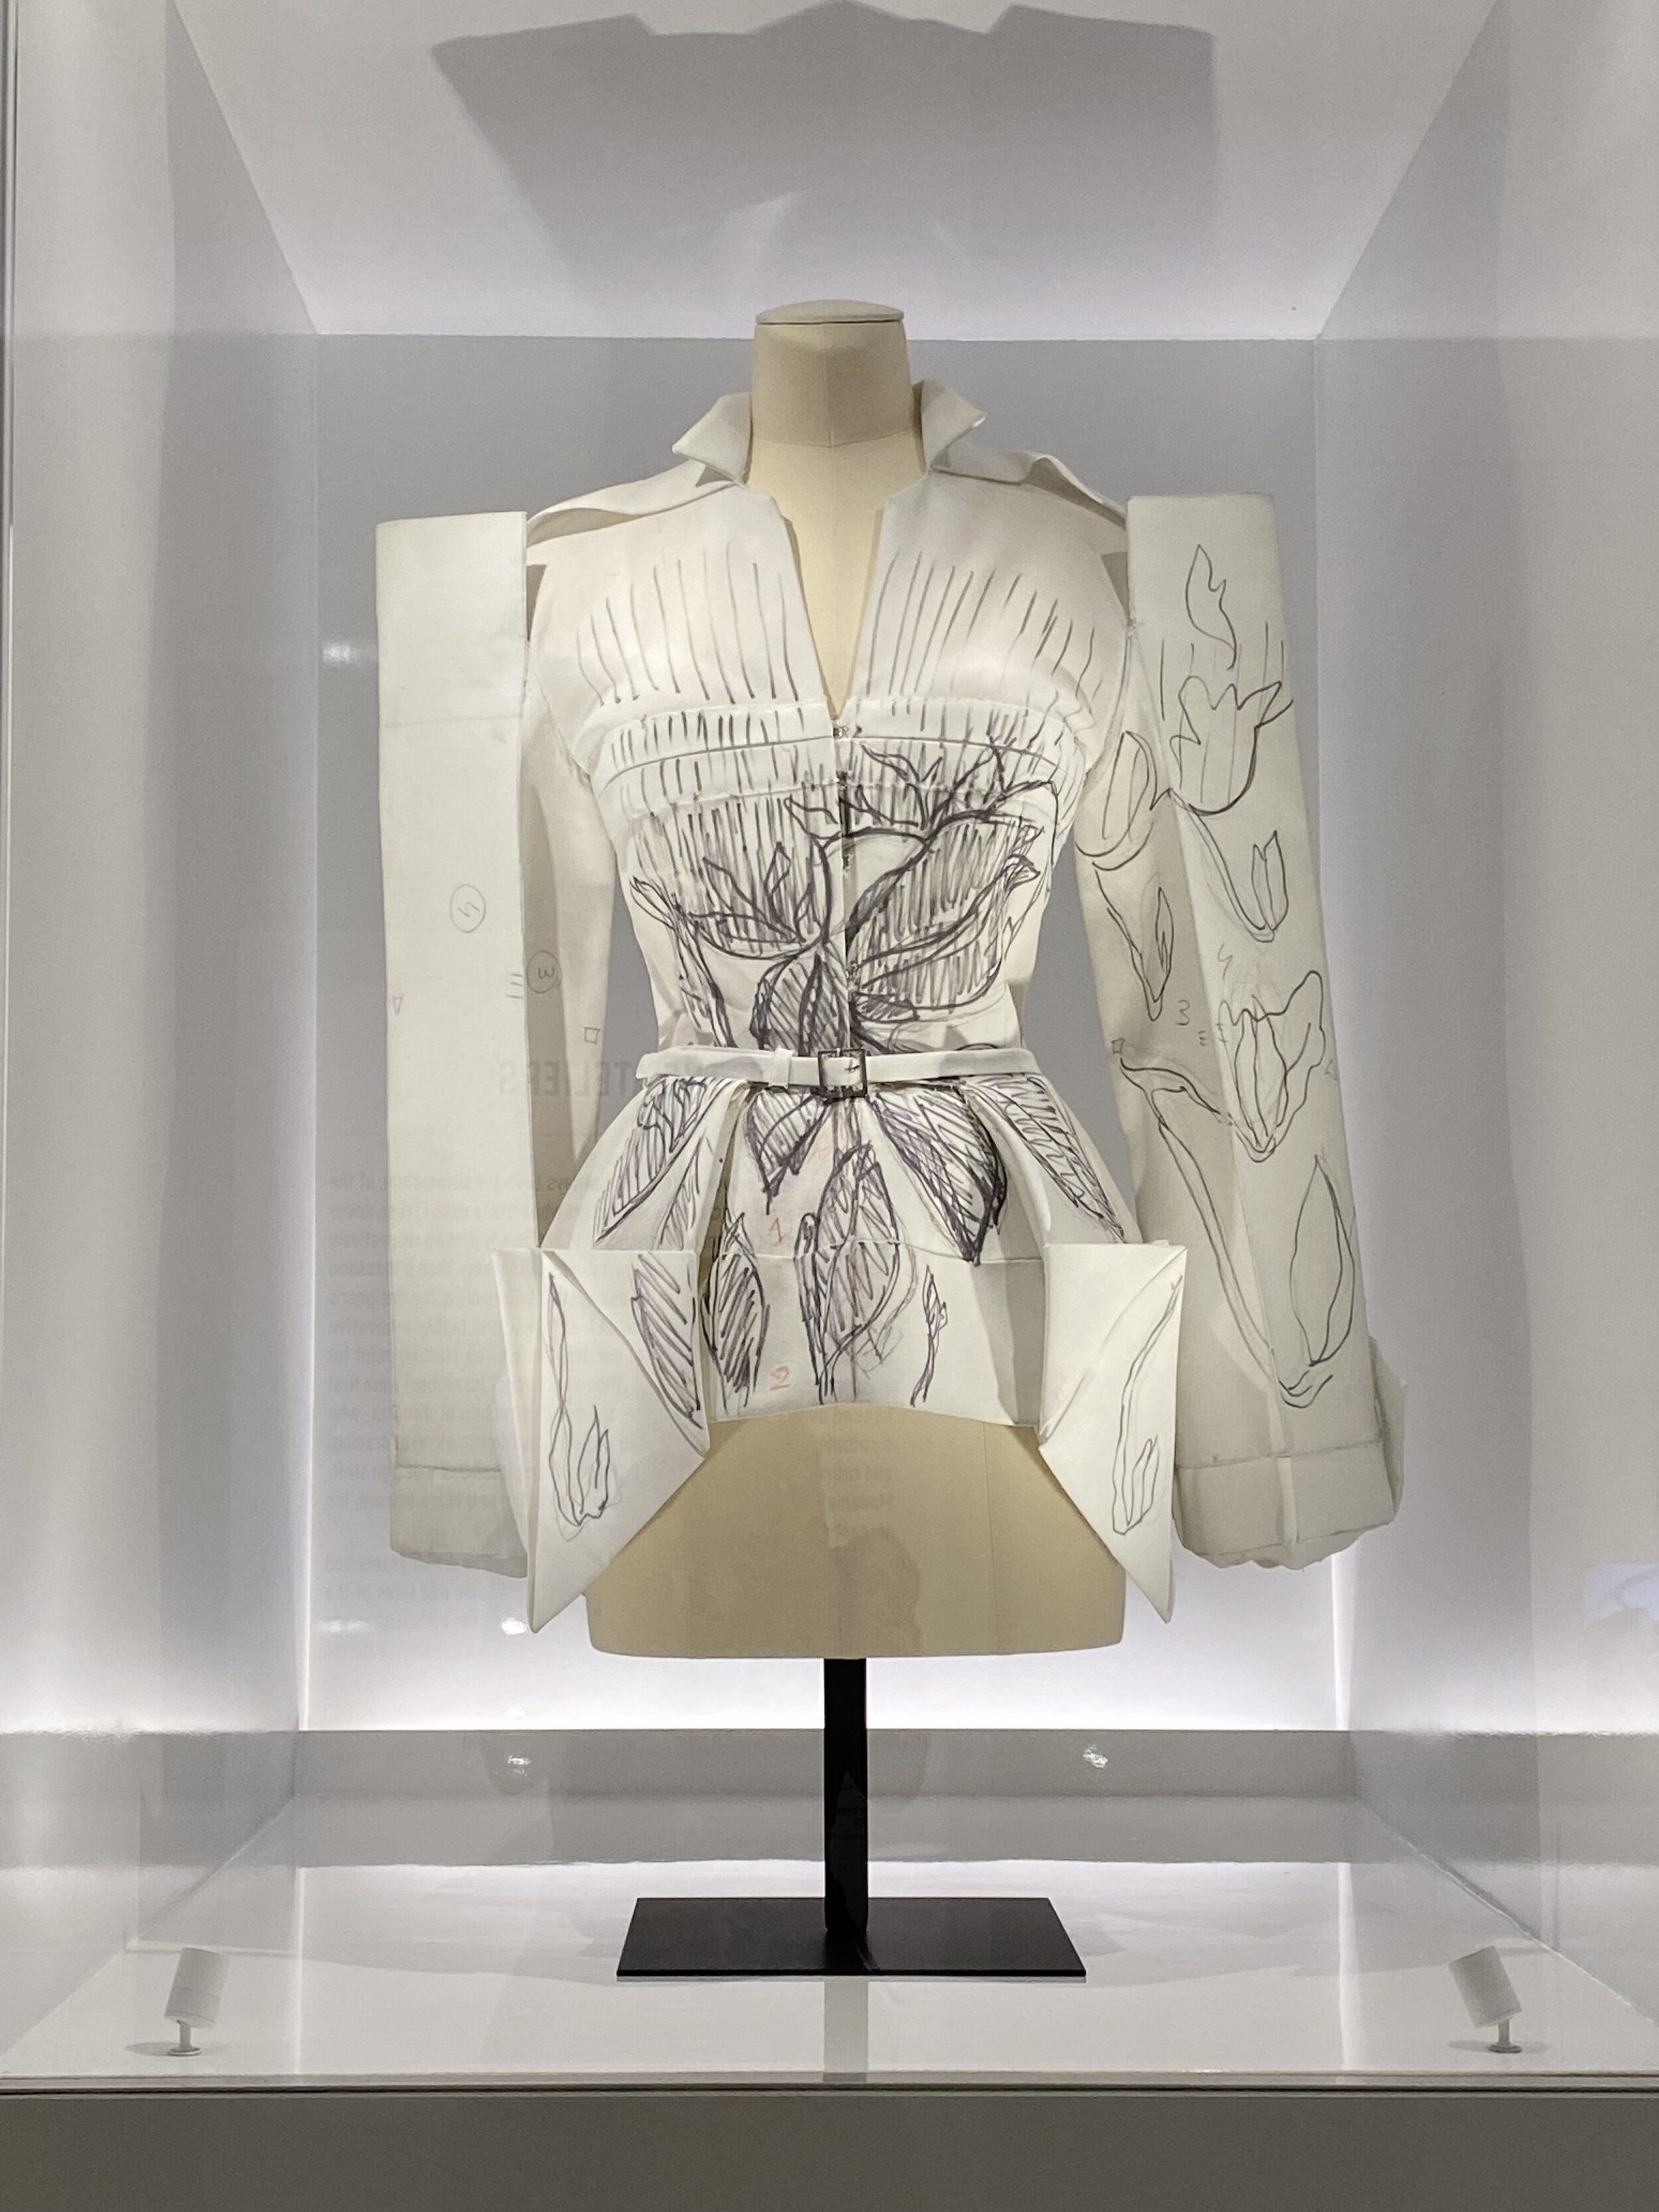 The Christian Dior Toile Room - The Cutting Class